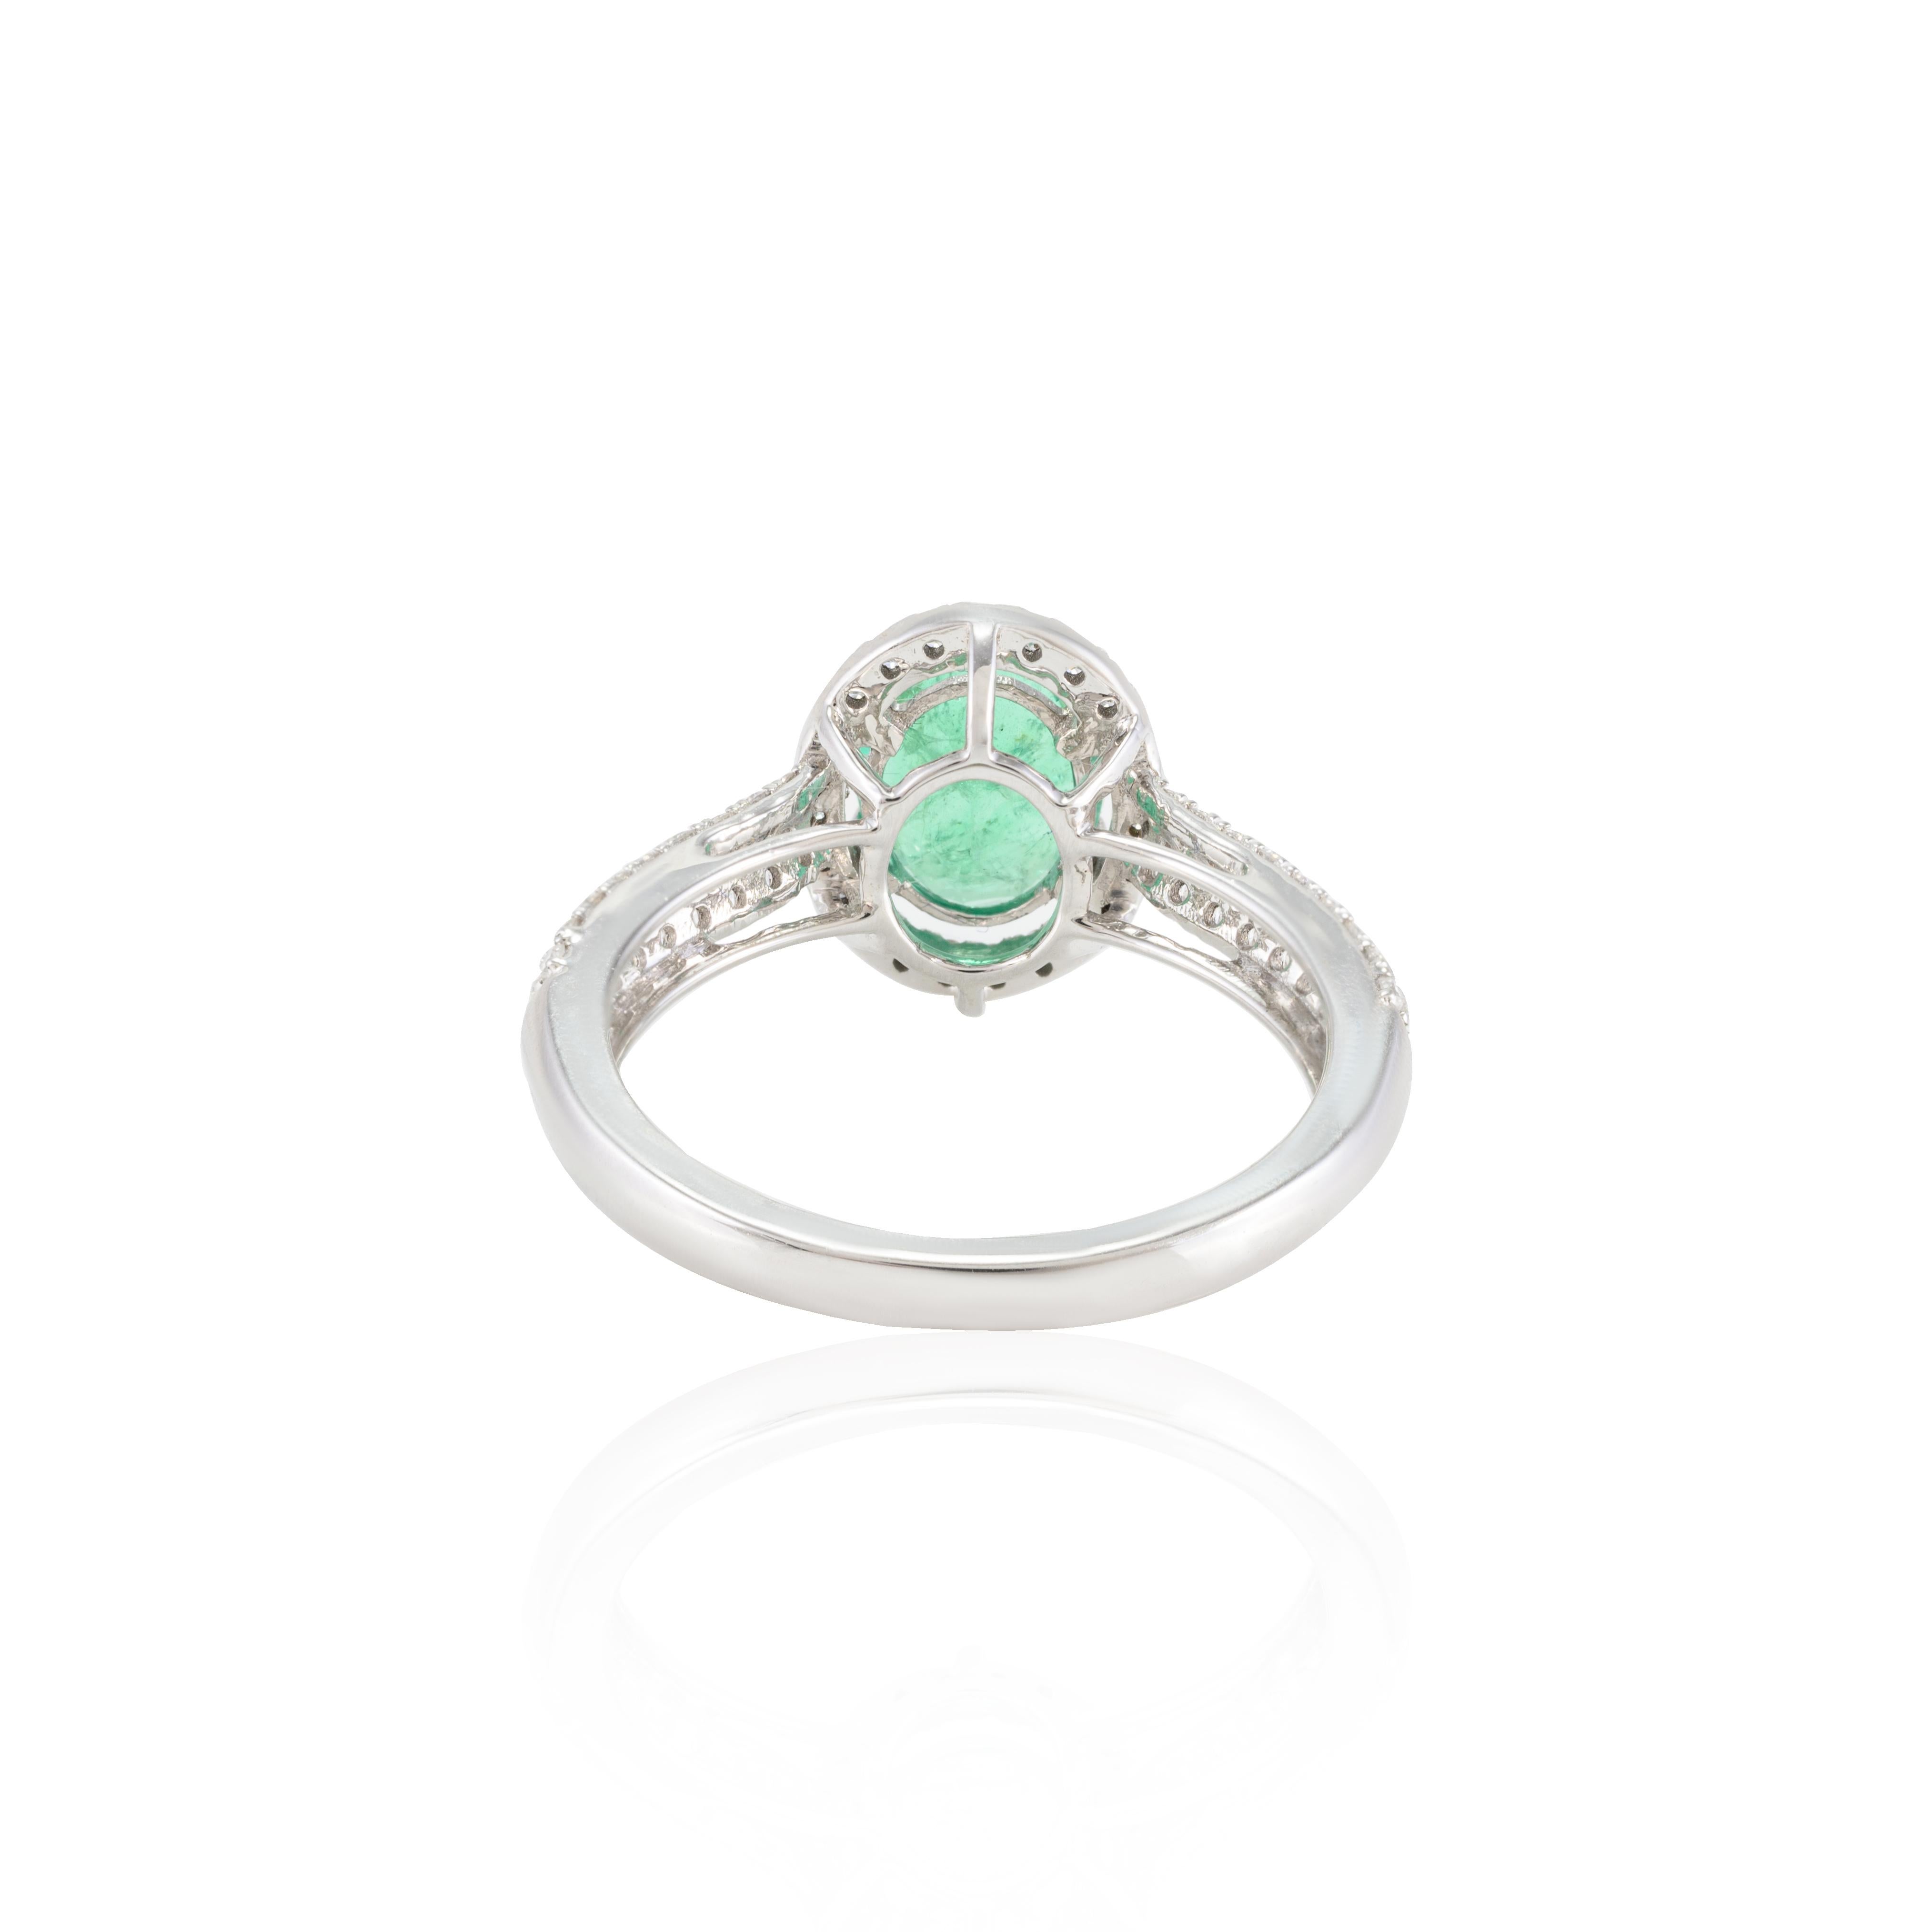 For Sale:  18k Solid White Gold Glamorous Emerald and Diamond Engagement Ring for Her 6